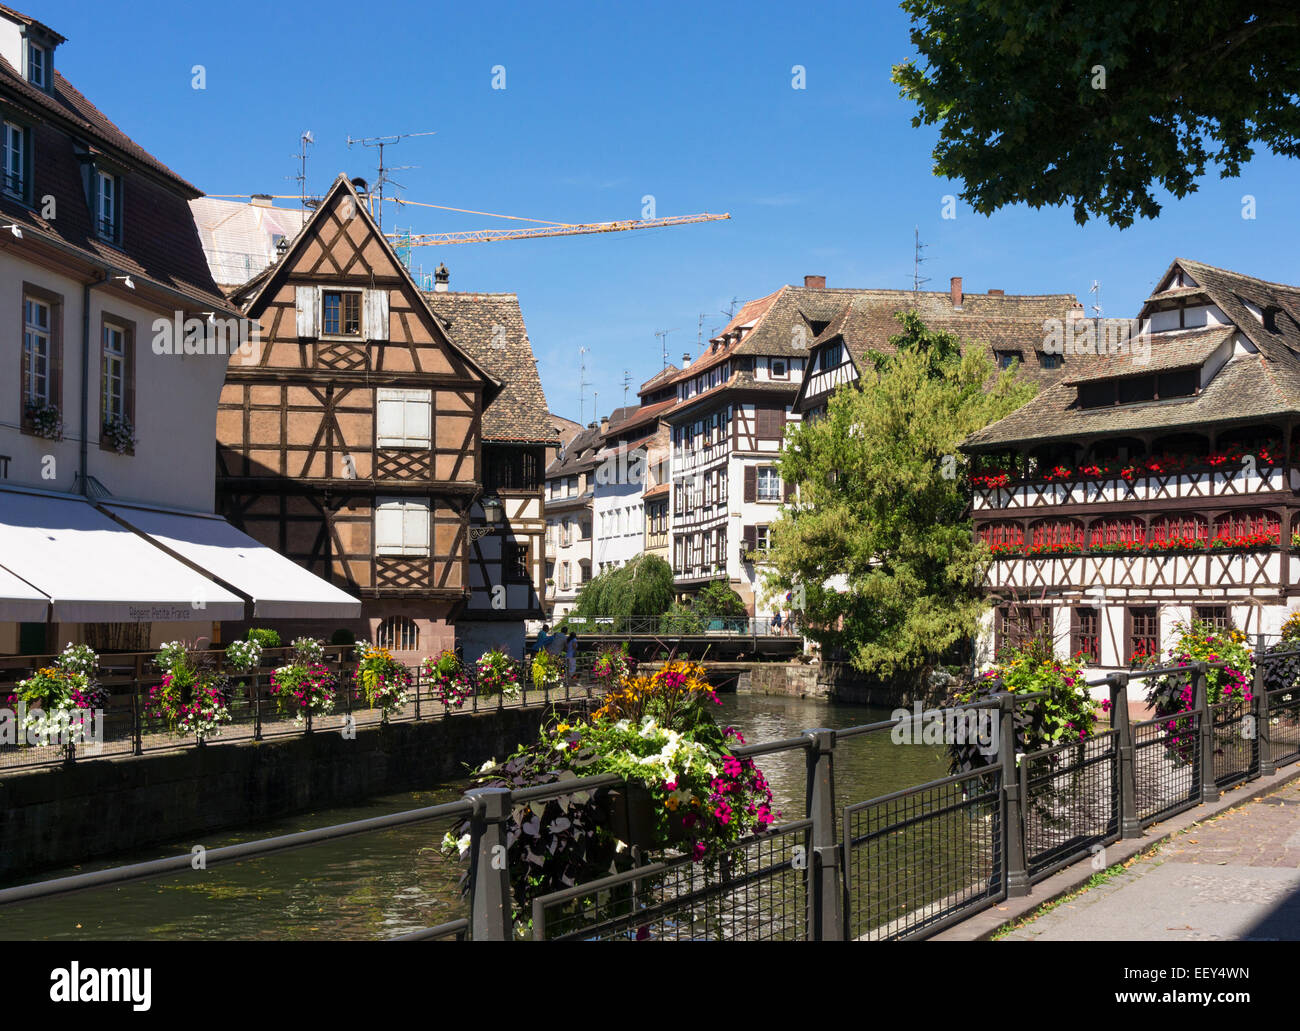 Crane repairing an old historic building in Petite France, Strasbourg, France, Europe with construction crane Stock Photo